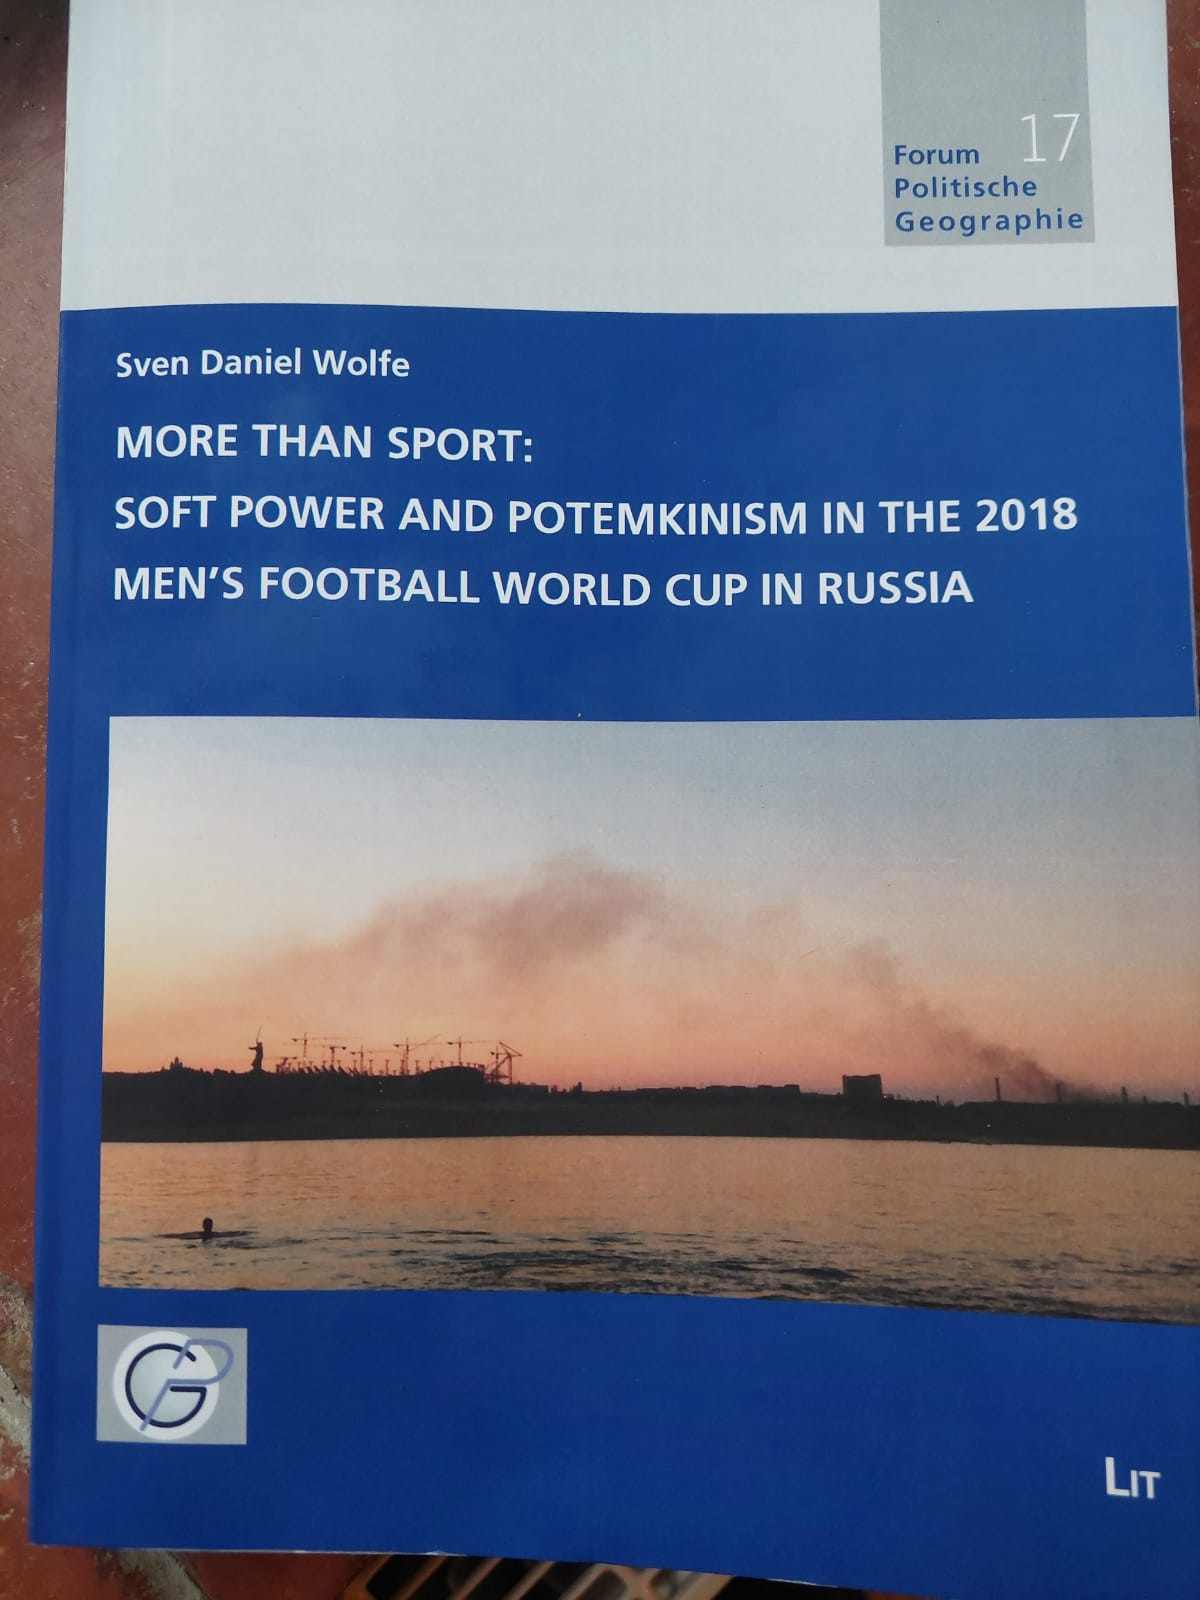 Sven Daniel Wolfe's book explores the impact that the 2018 FIFA World Cup had on ordinary people in Russia ©ITG 